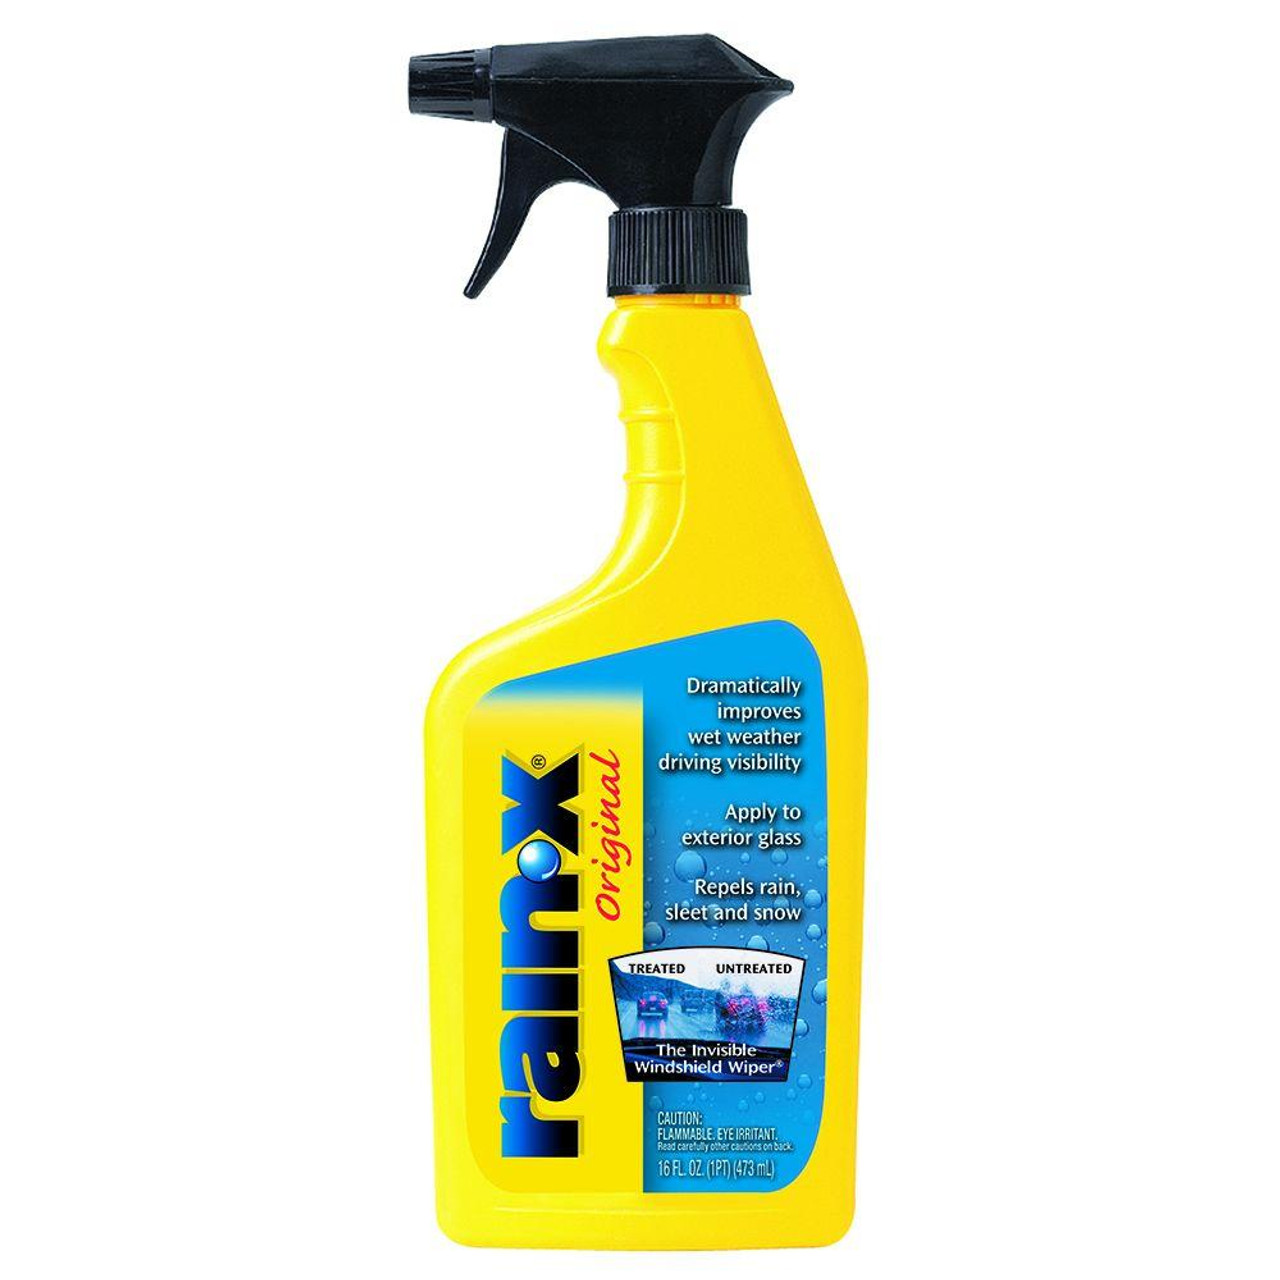 MegaWatts. Rain-X 2-in-1 Glass Cleaner With Rain Repellent Trigger